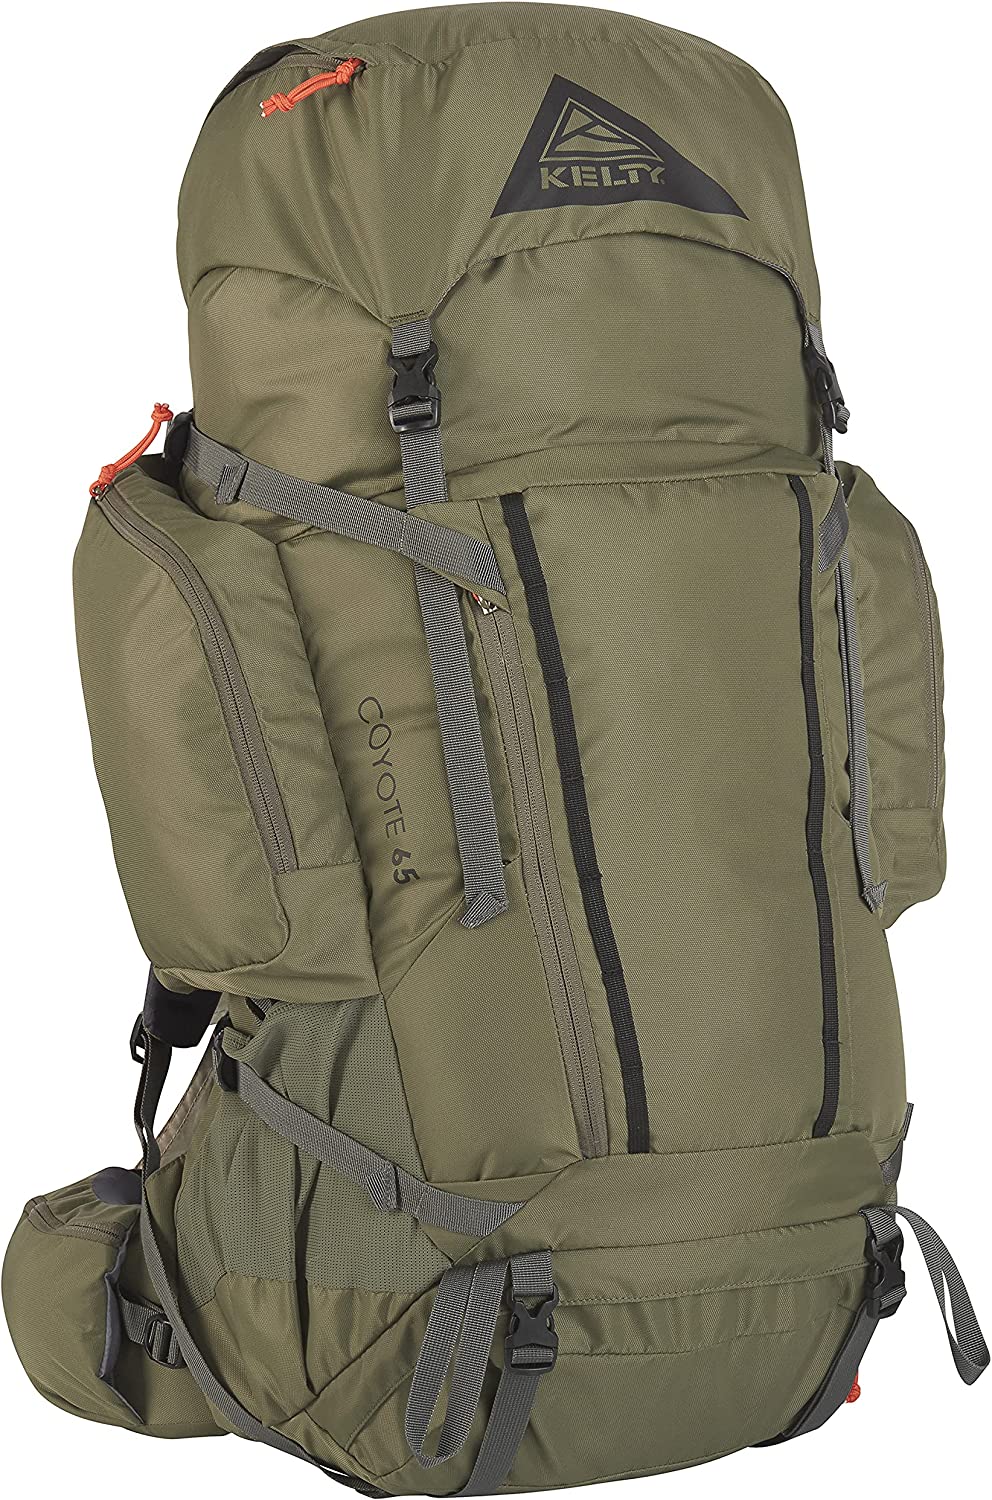 Kelty Coyote 60-105 Liter Backpack, Men’s and Women’s (2020 Update) – Hiking, Backpacking, Travel Backpack